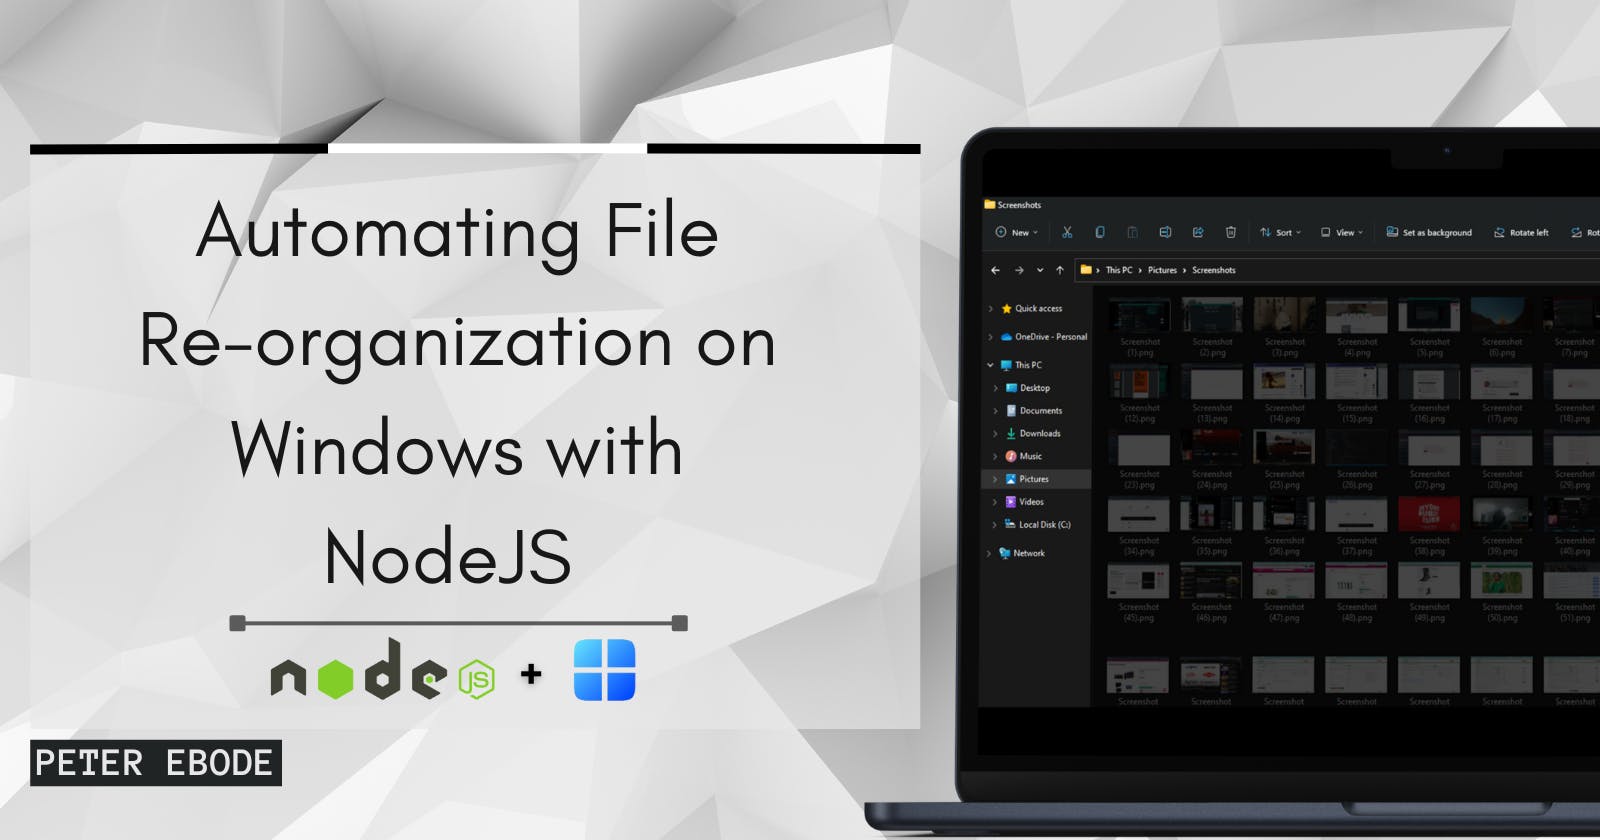 Automating file re-organization on Windows with NodeJS